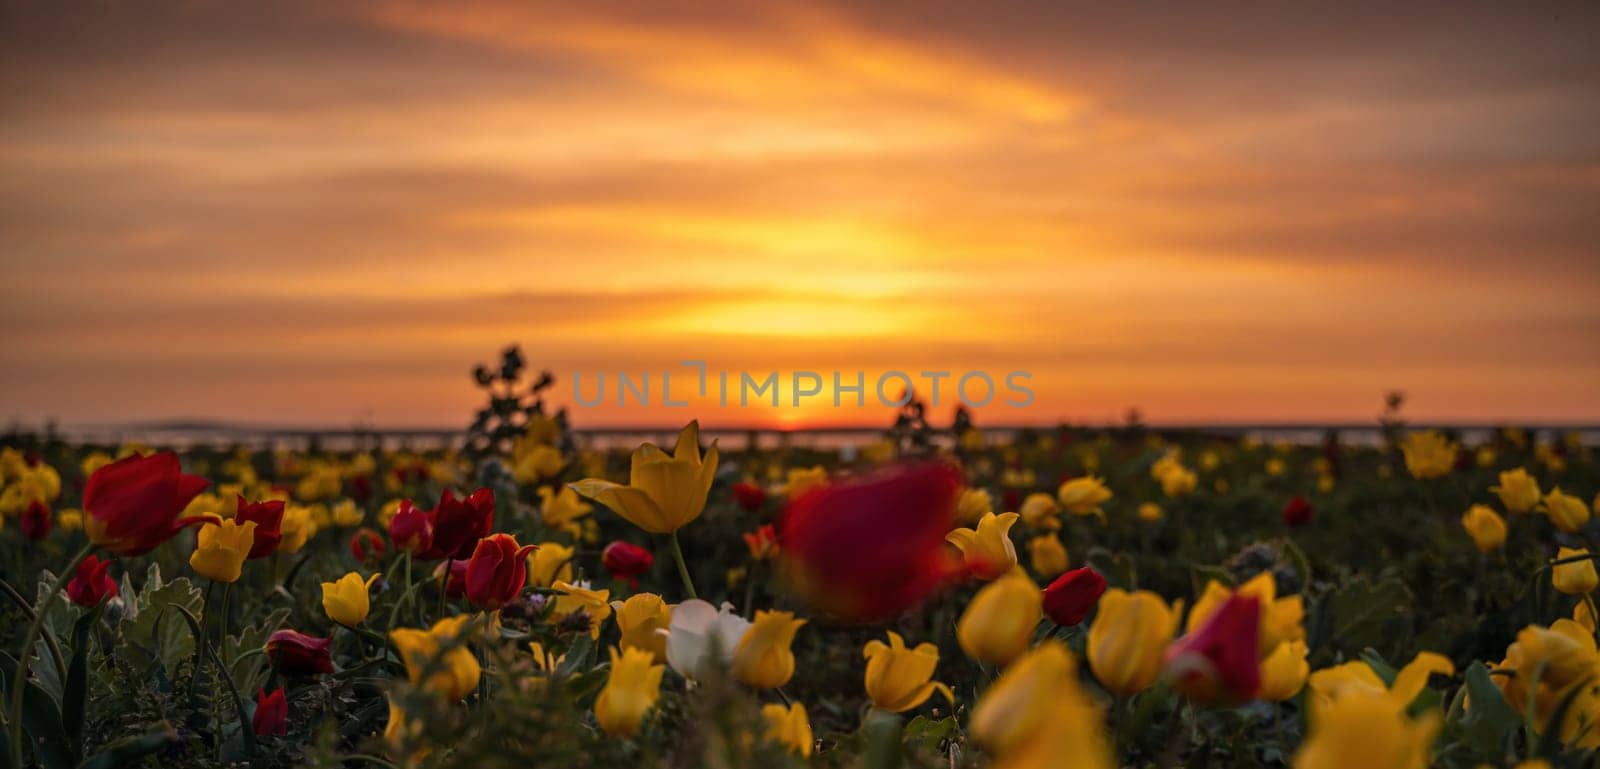 Wild tulip flowers at sunset, natural seasonal background. Multi-colored tulips Tulipa schrenkii in their natural habitat, listed in the Red Book. by Matiunina